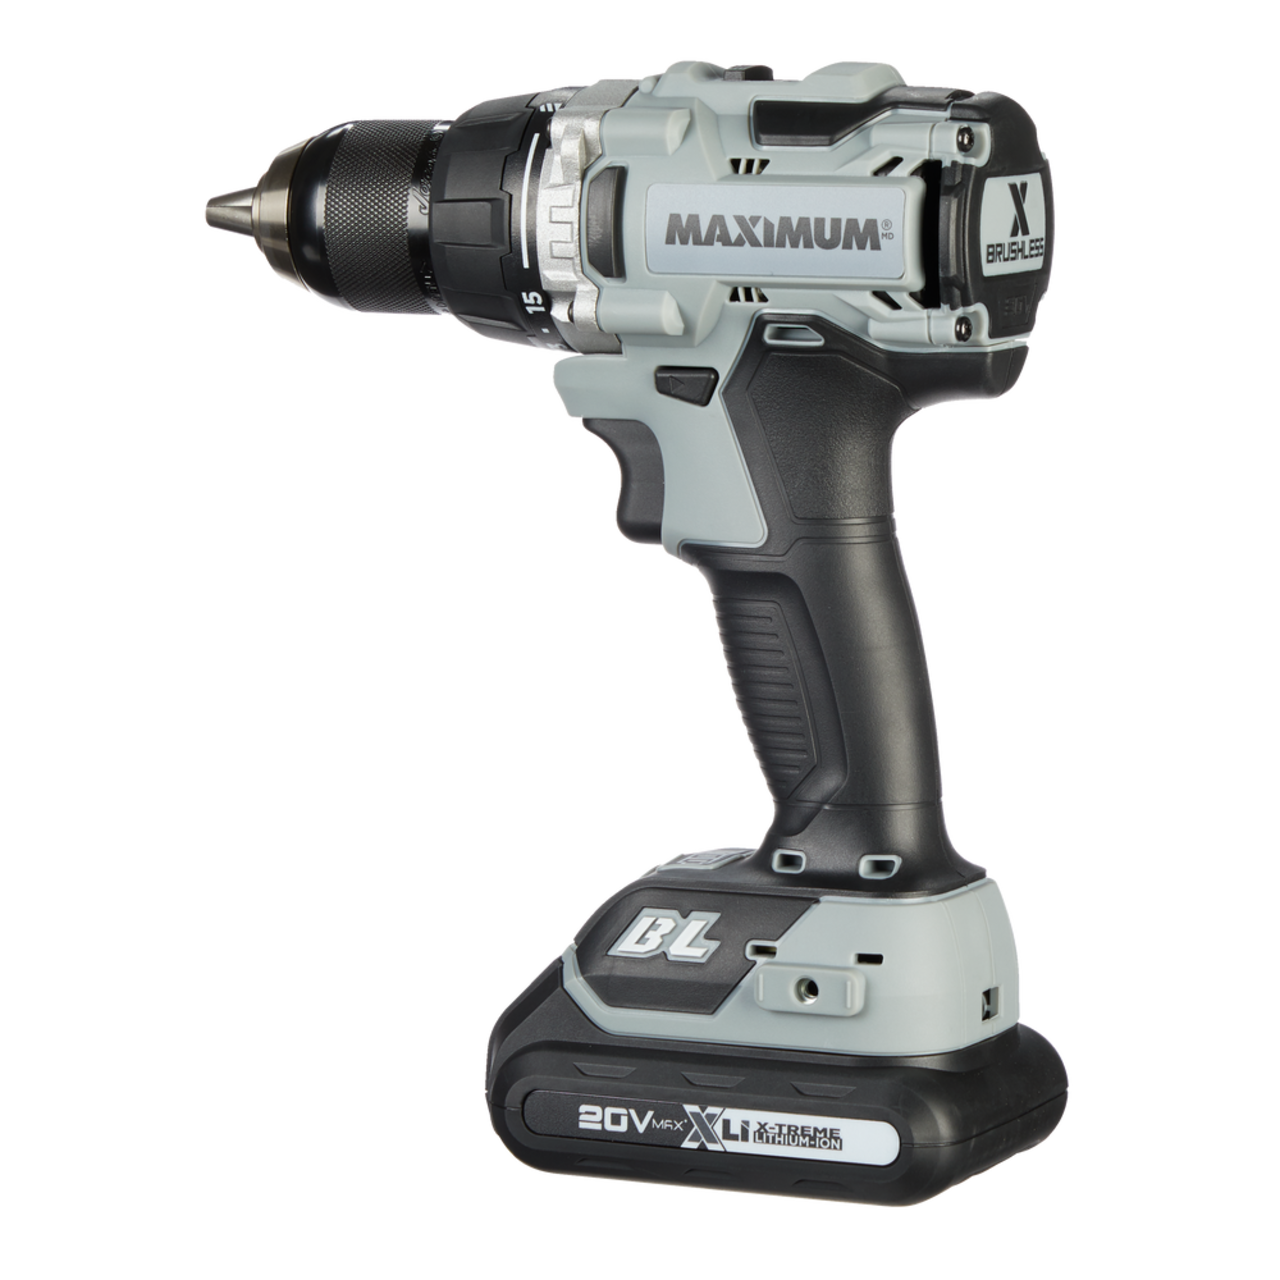 https://media-www.canadiantire.ca/product/fixing/tools/portable-power-tools/0547160/maximum-brushless-20v-drill-5379aaa6-5eb6-467c-924d-a780917fbb25.png?imdensity=1&imwidth=640&impolicy=mZoom